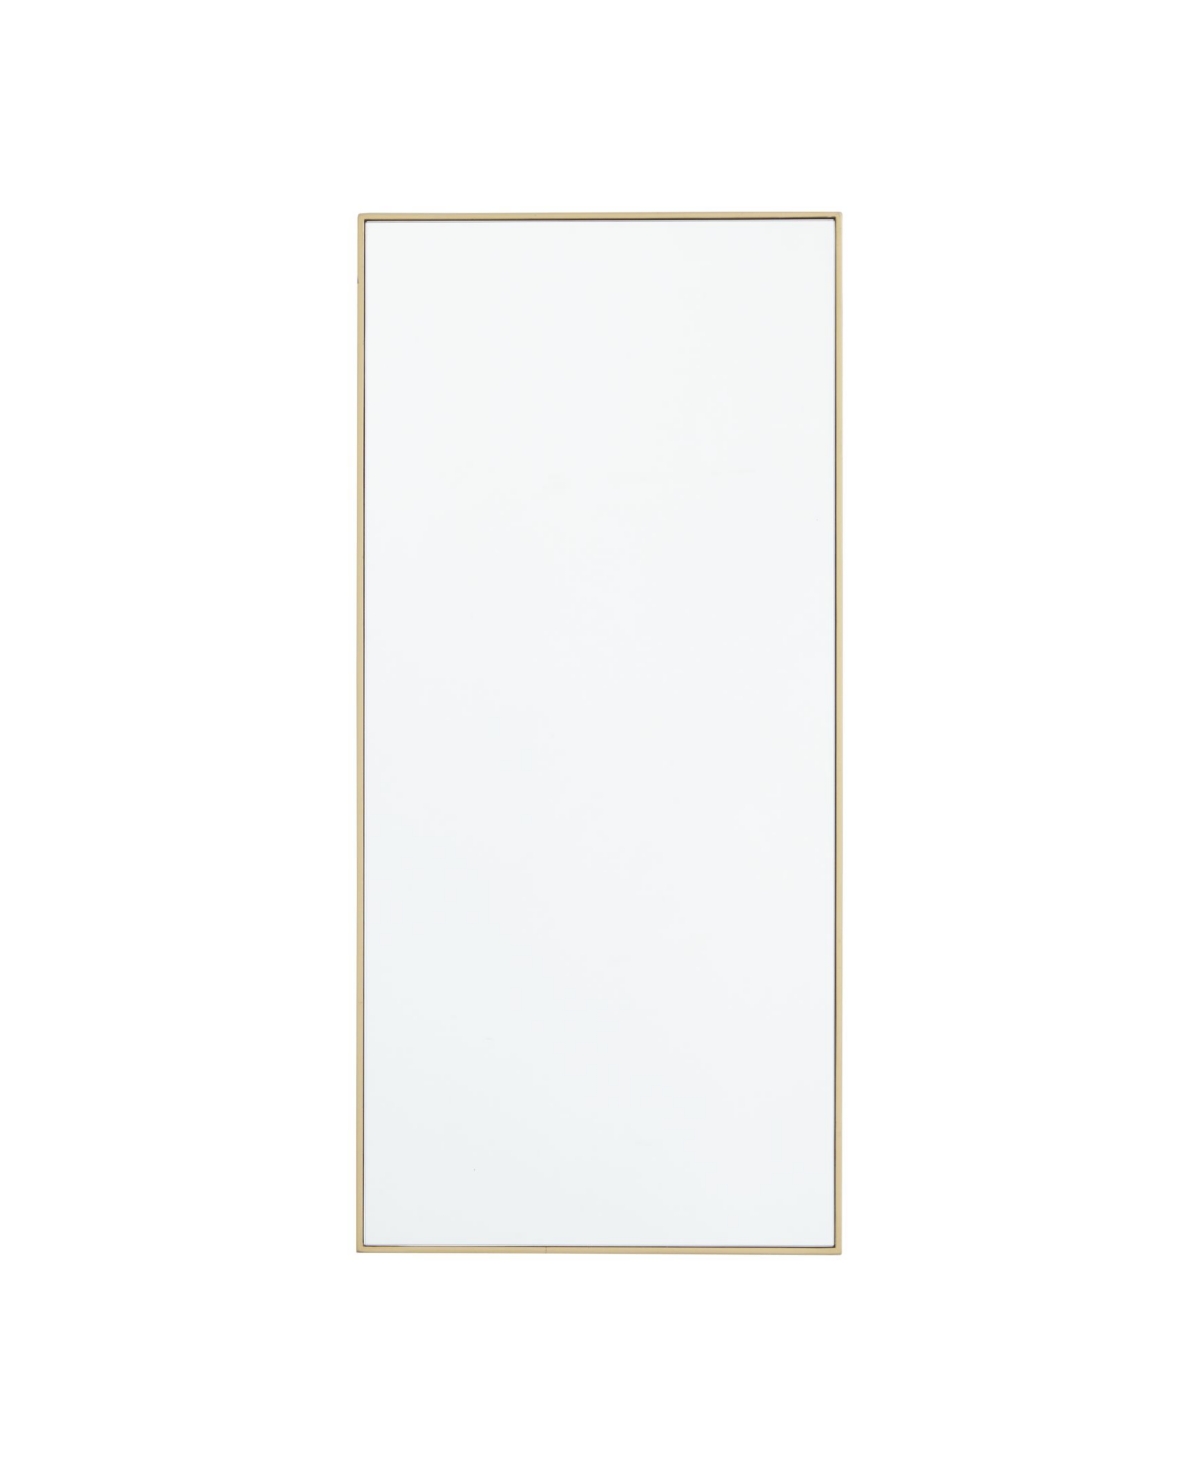 Wood Contemporary Wall Mirror - Gold-Tone  x